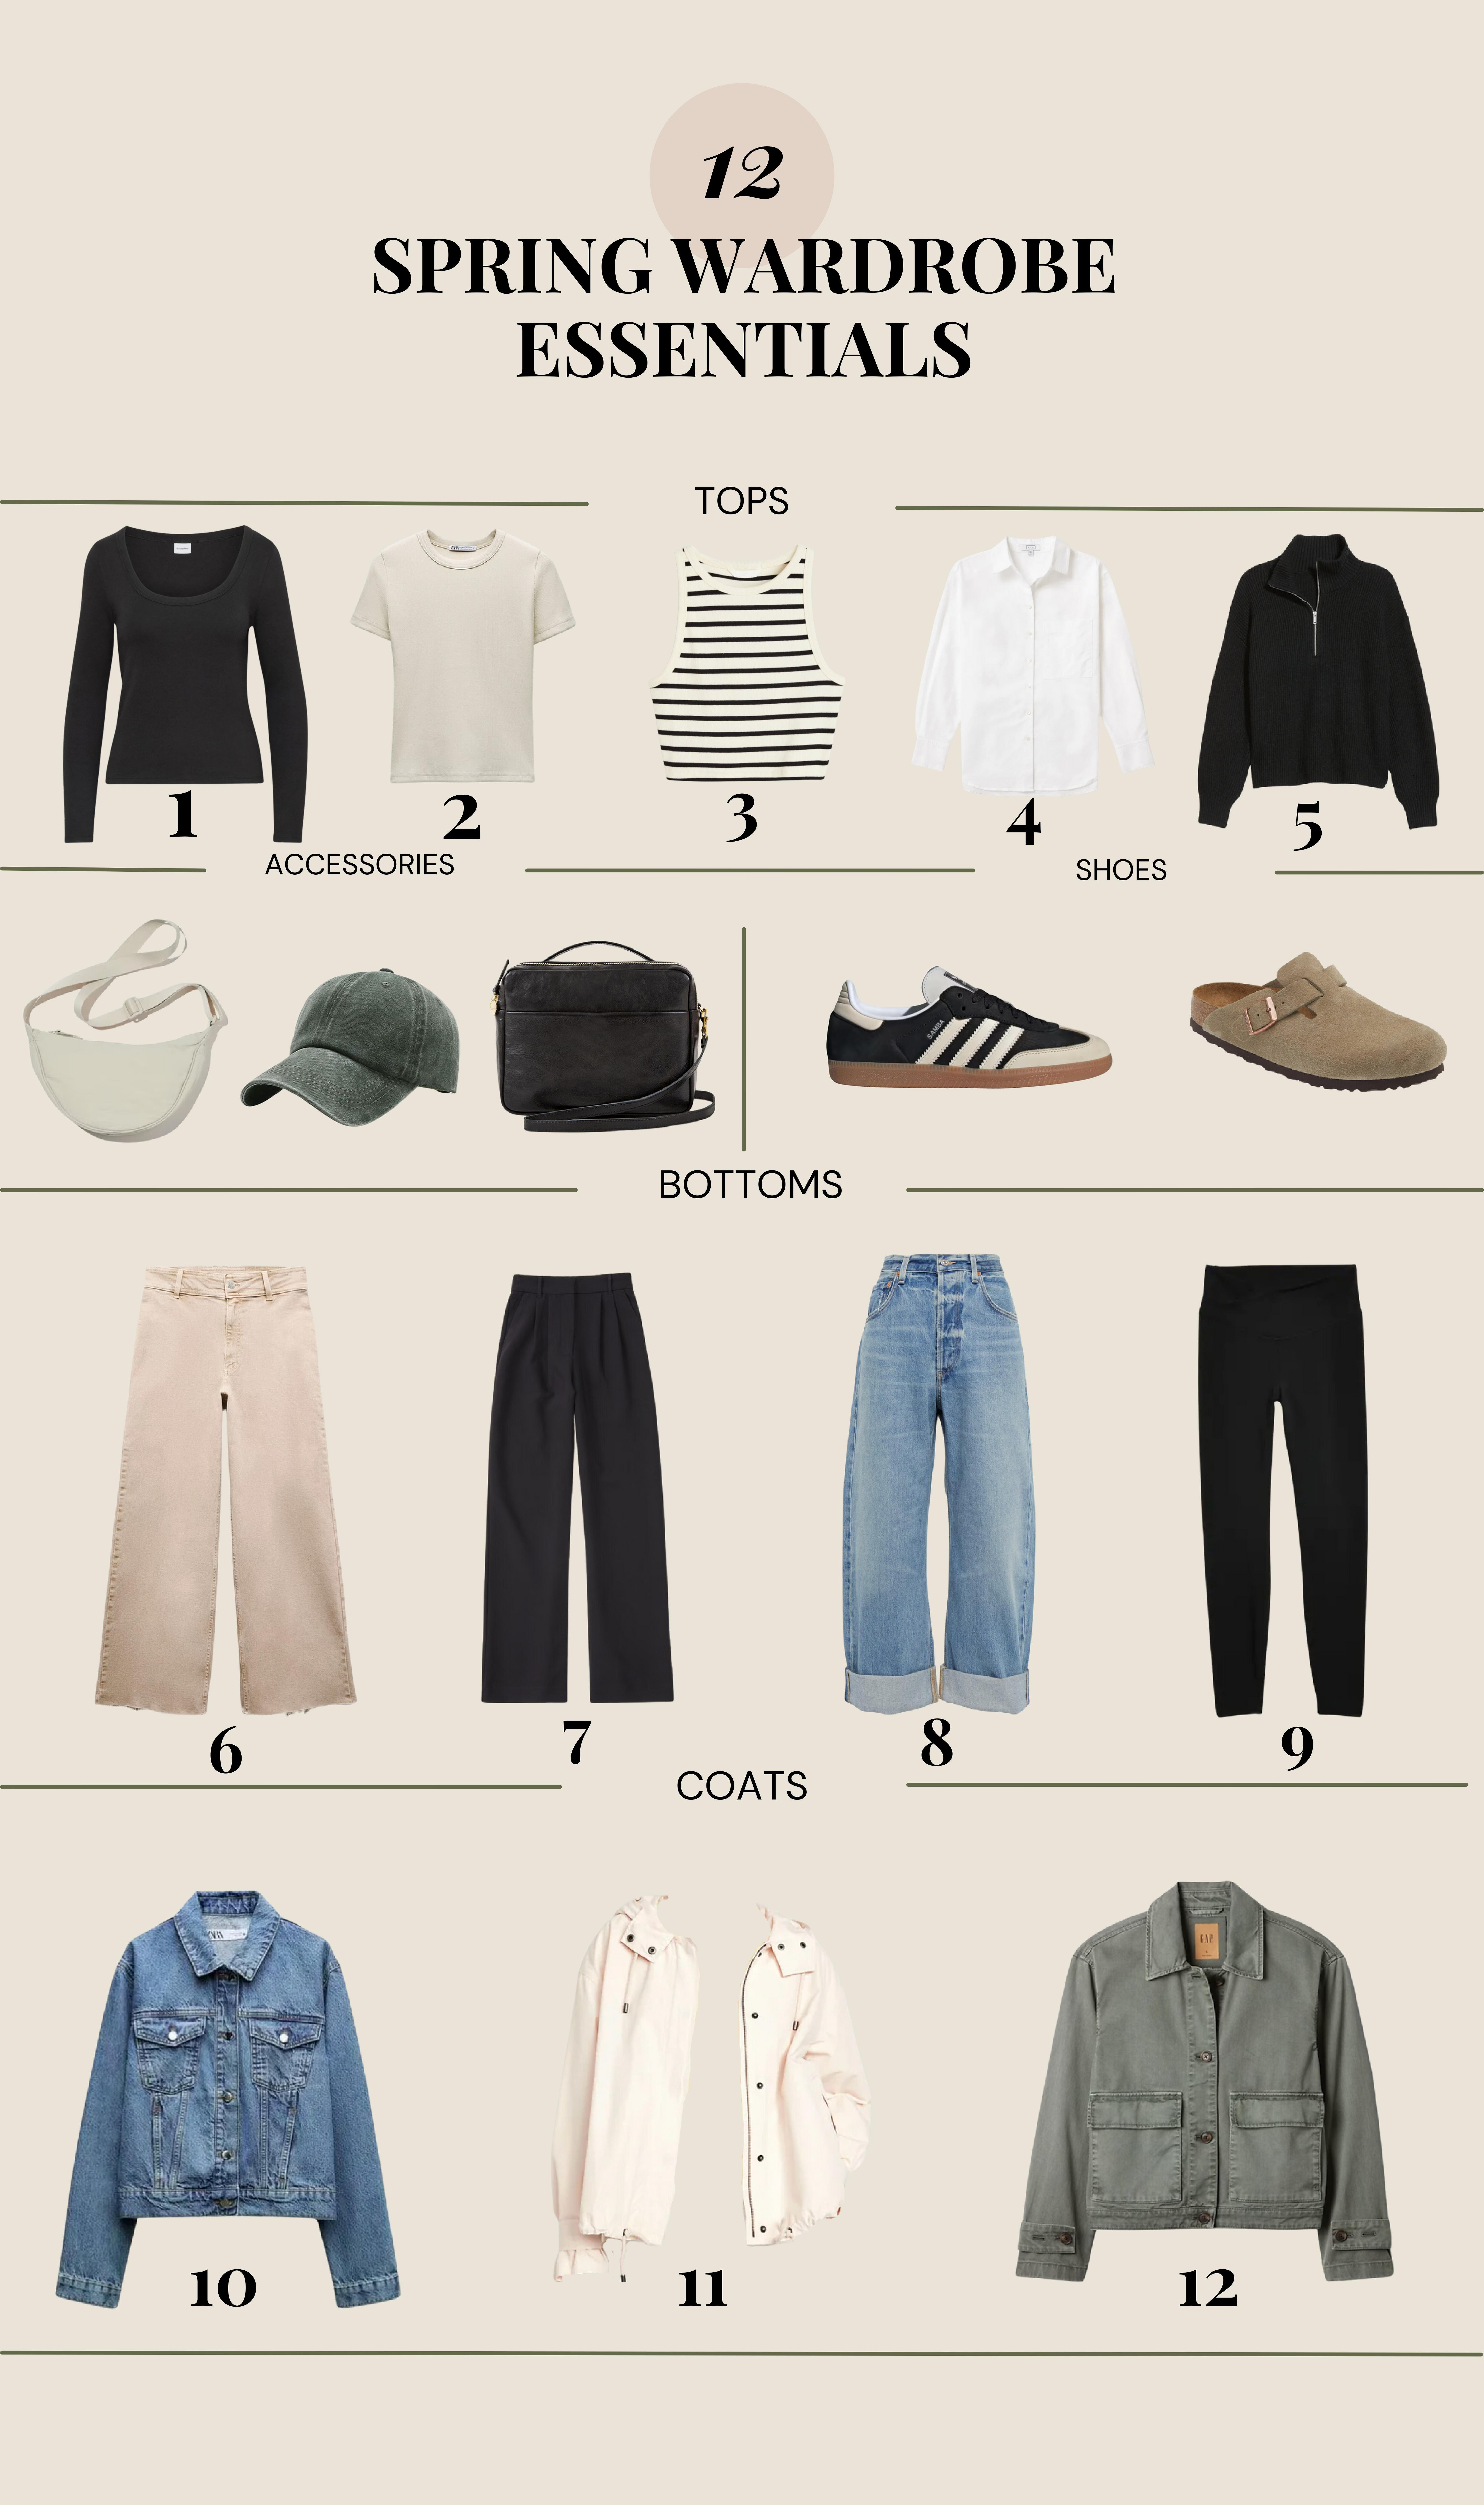 12 Clothing Wardrobe Essentials for Spring With 14 Printable Outfit  Suggestions